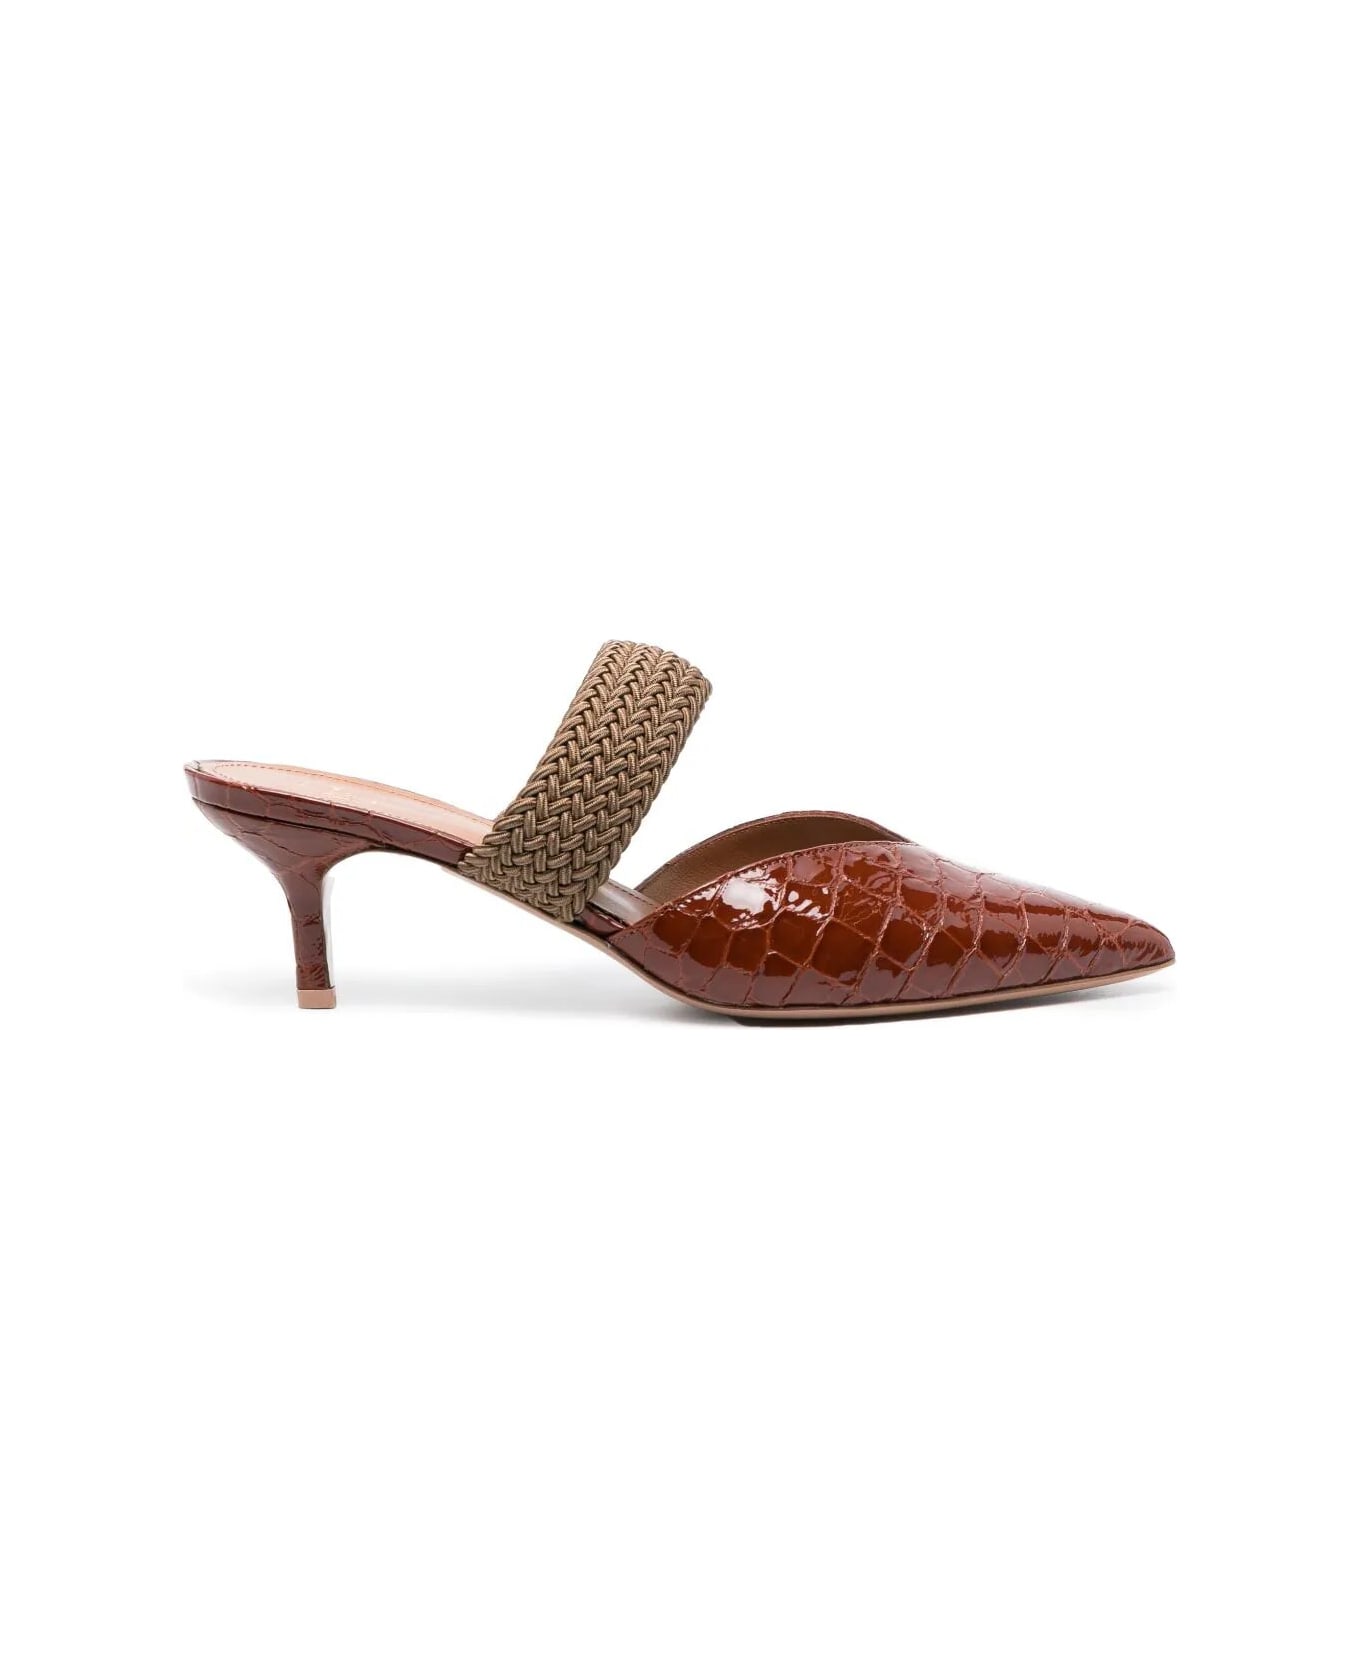 Malone Souliers Mules Tacco45 - Cinnamon Brown